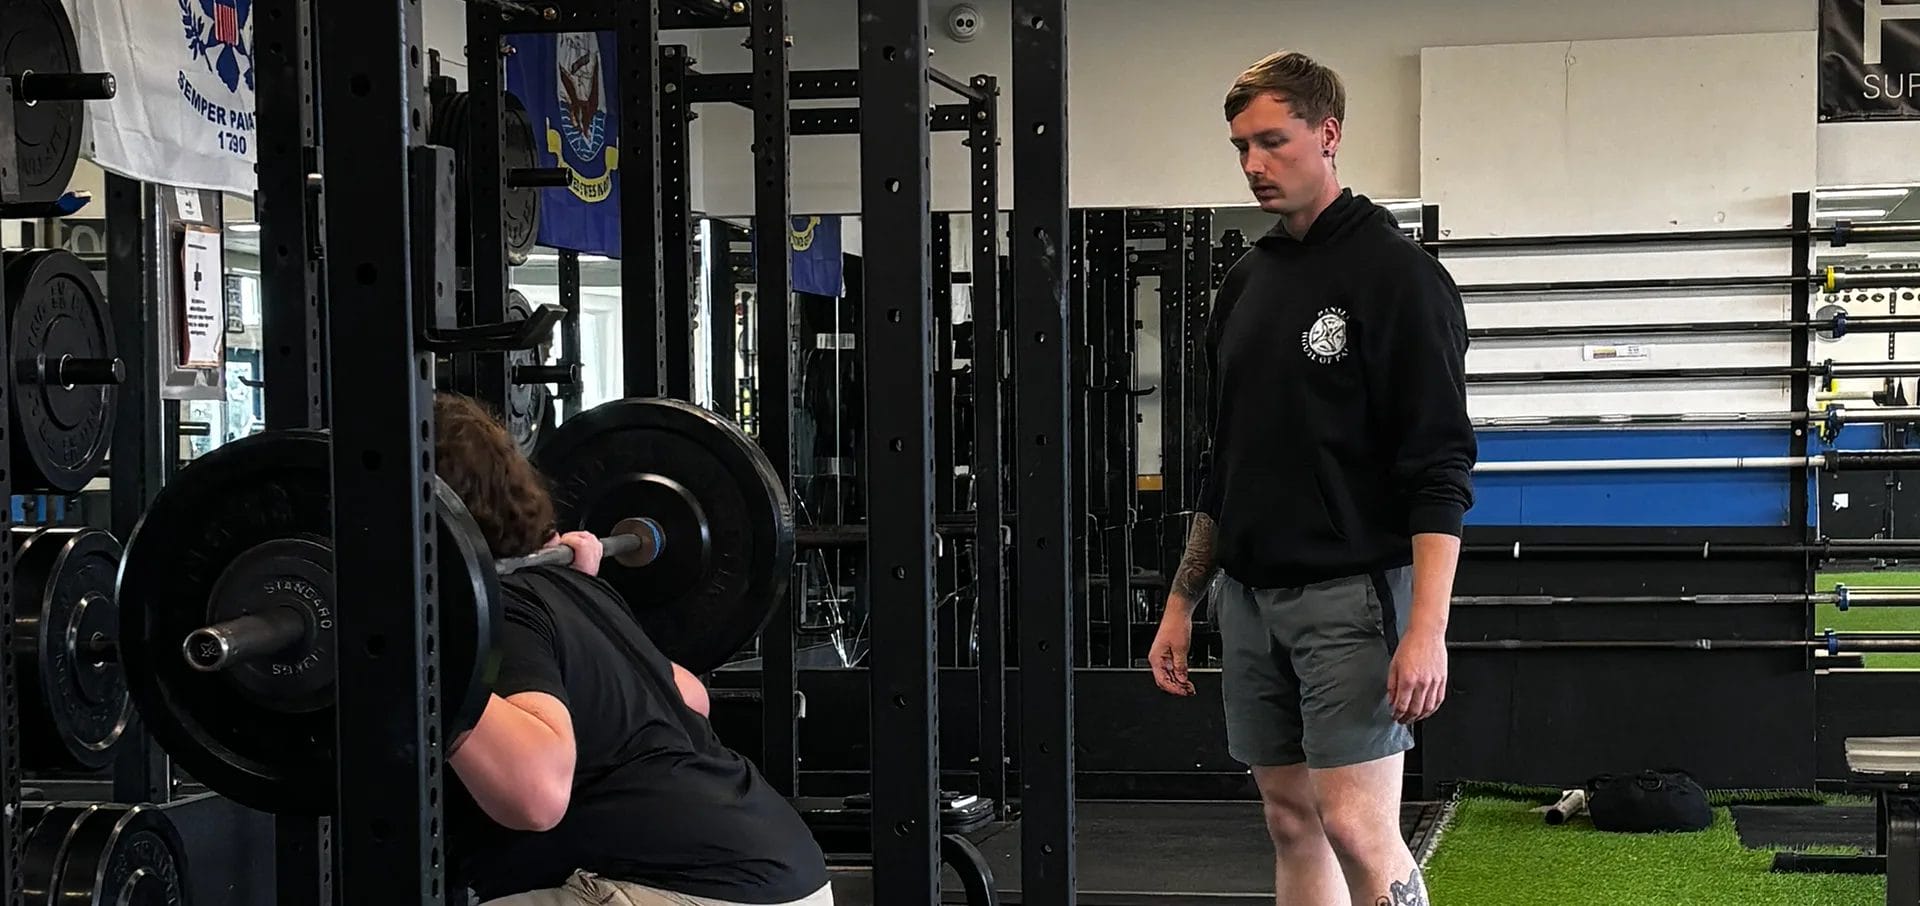 Personal training at the Gig Harbor Strength & Fitness